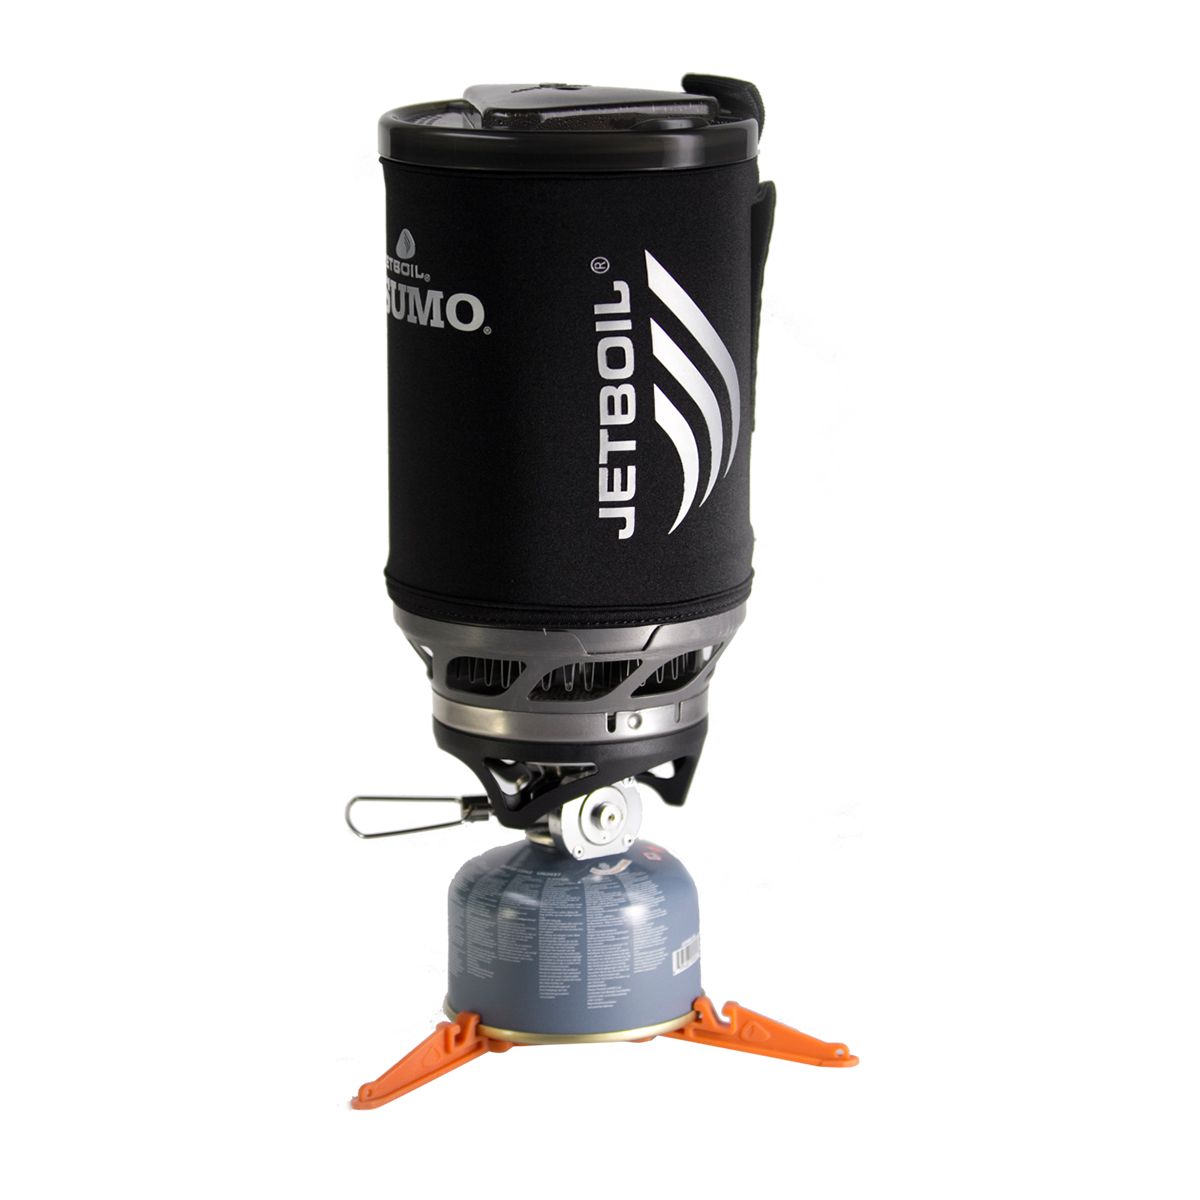 Image of Jetboil Sumo Group Cooking System